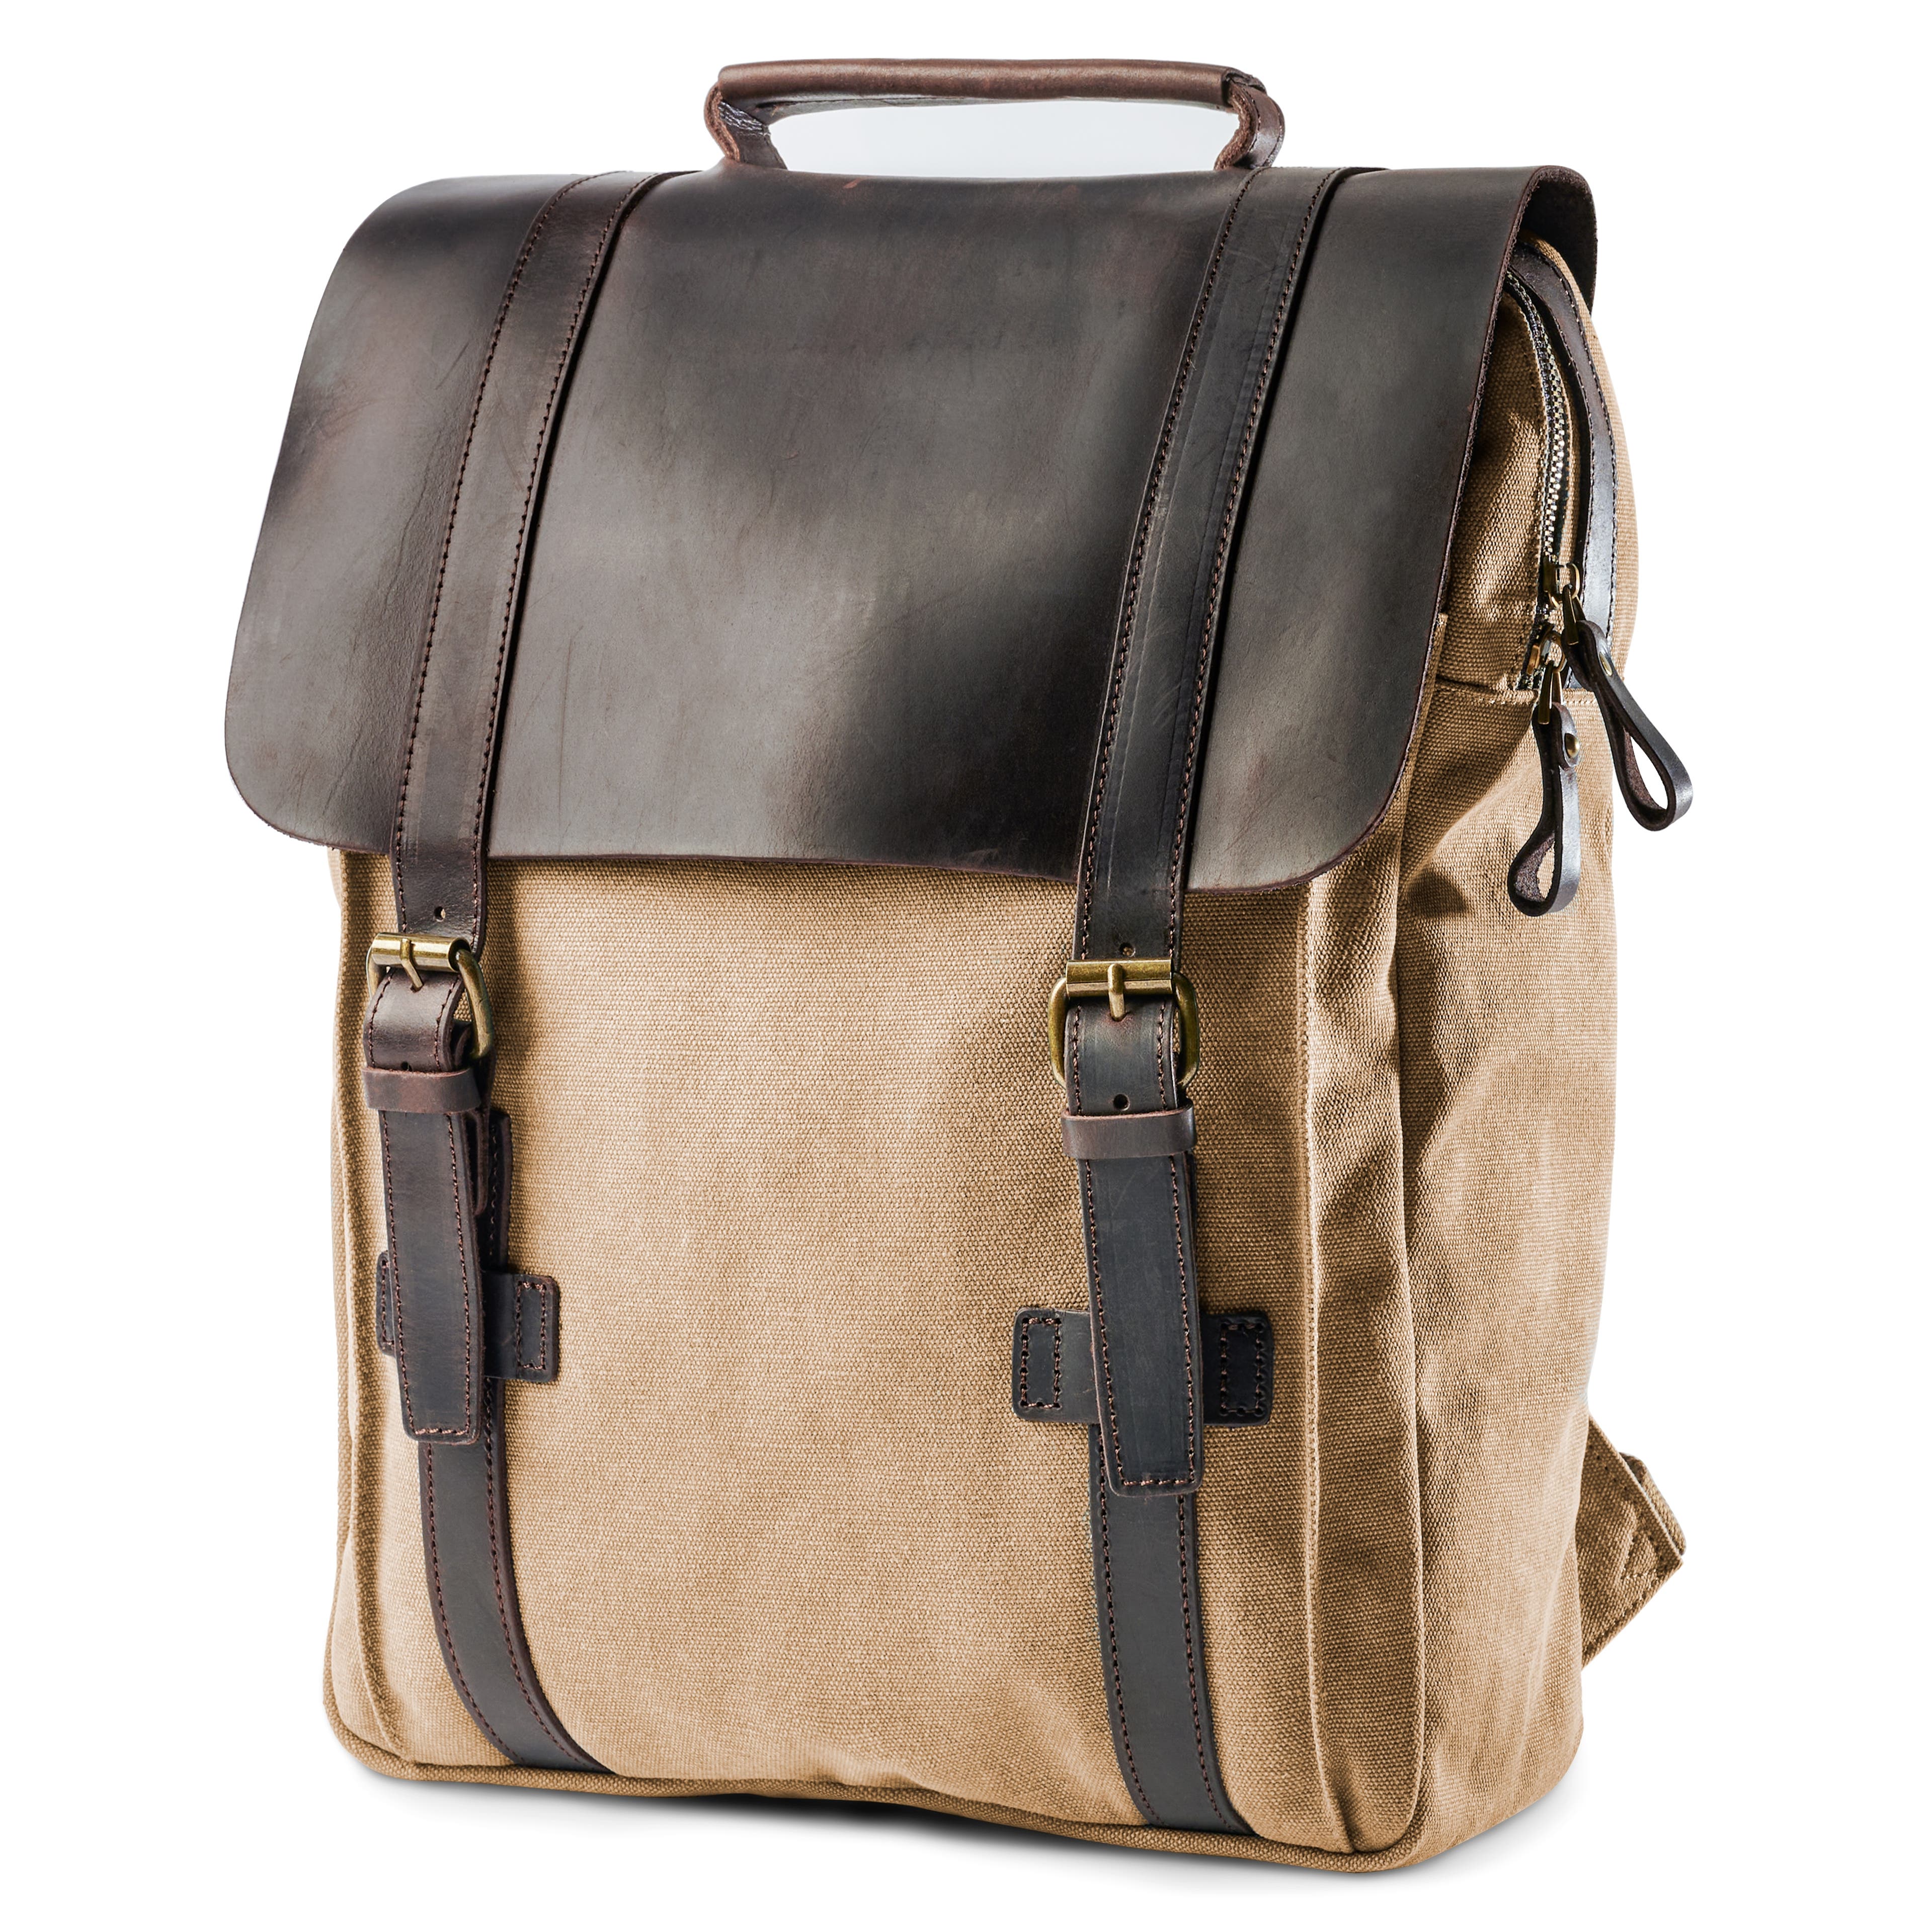 Vintage-Style Graphite Leather & Canvas Backpack - for Men - Delton Bags